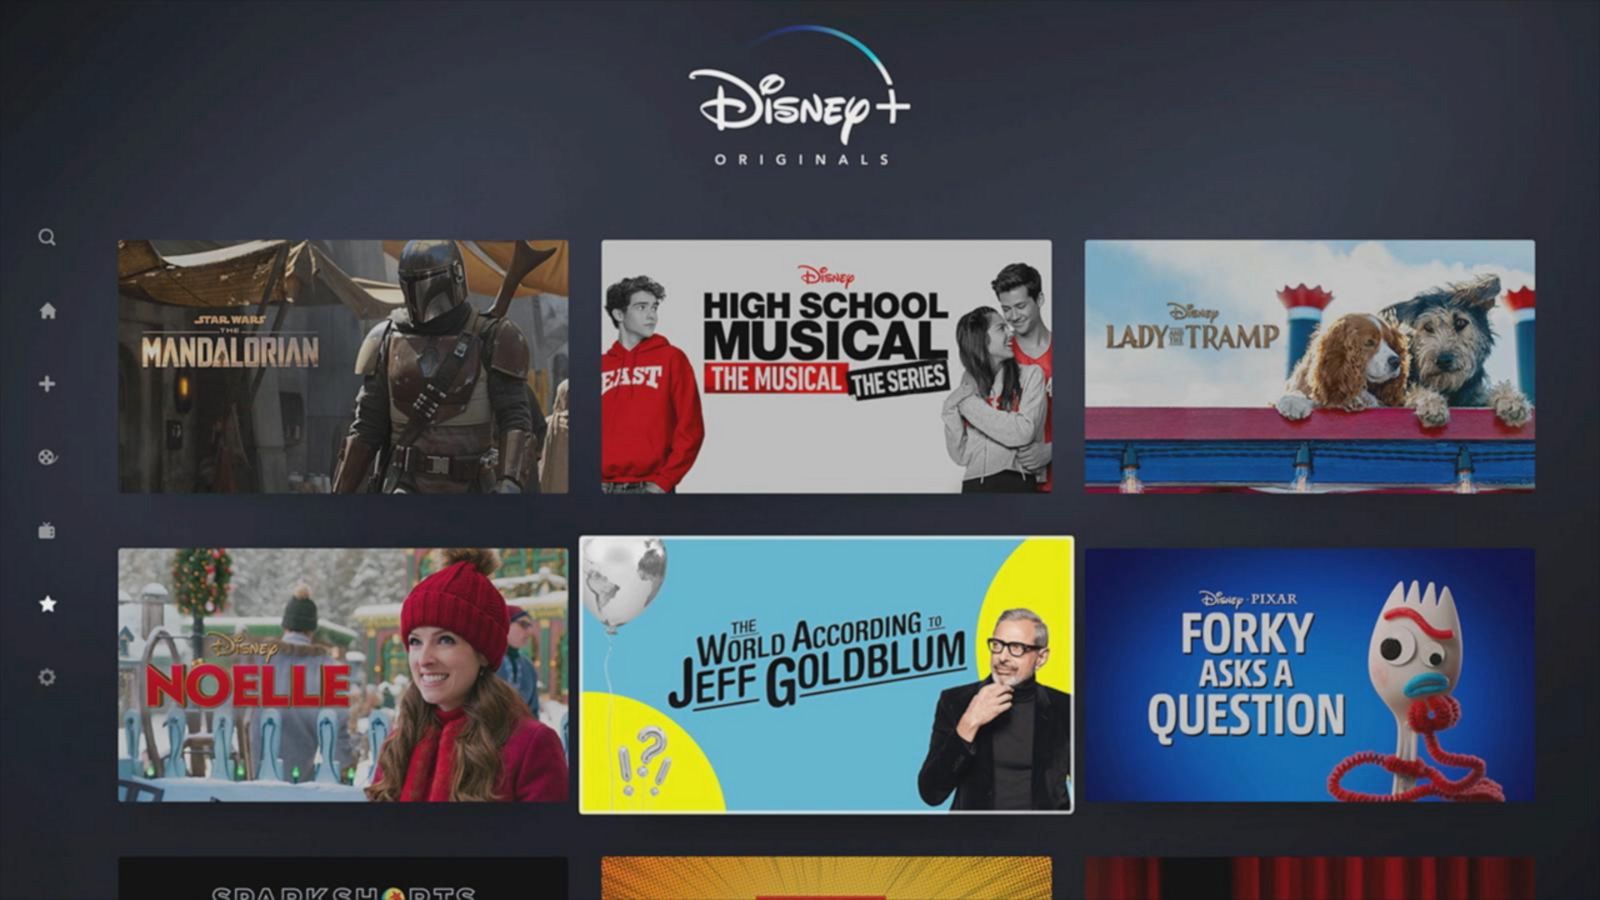 The vault is open for Disney+ as the streaming service officially launches 